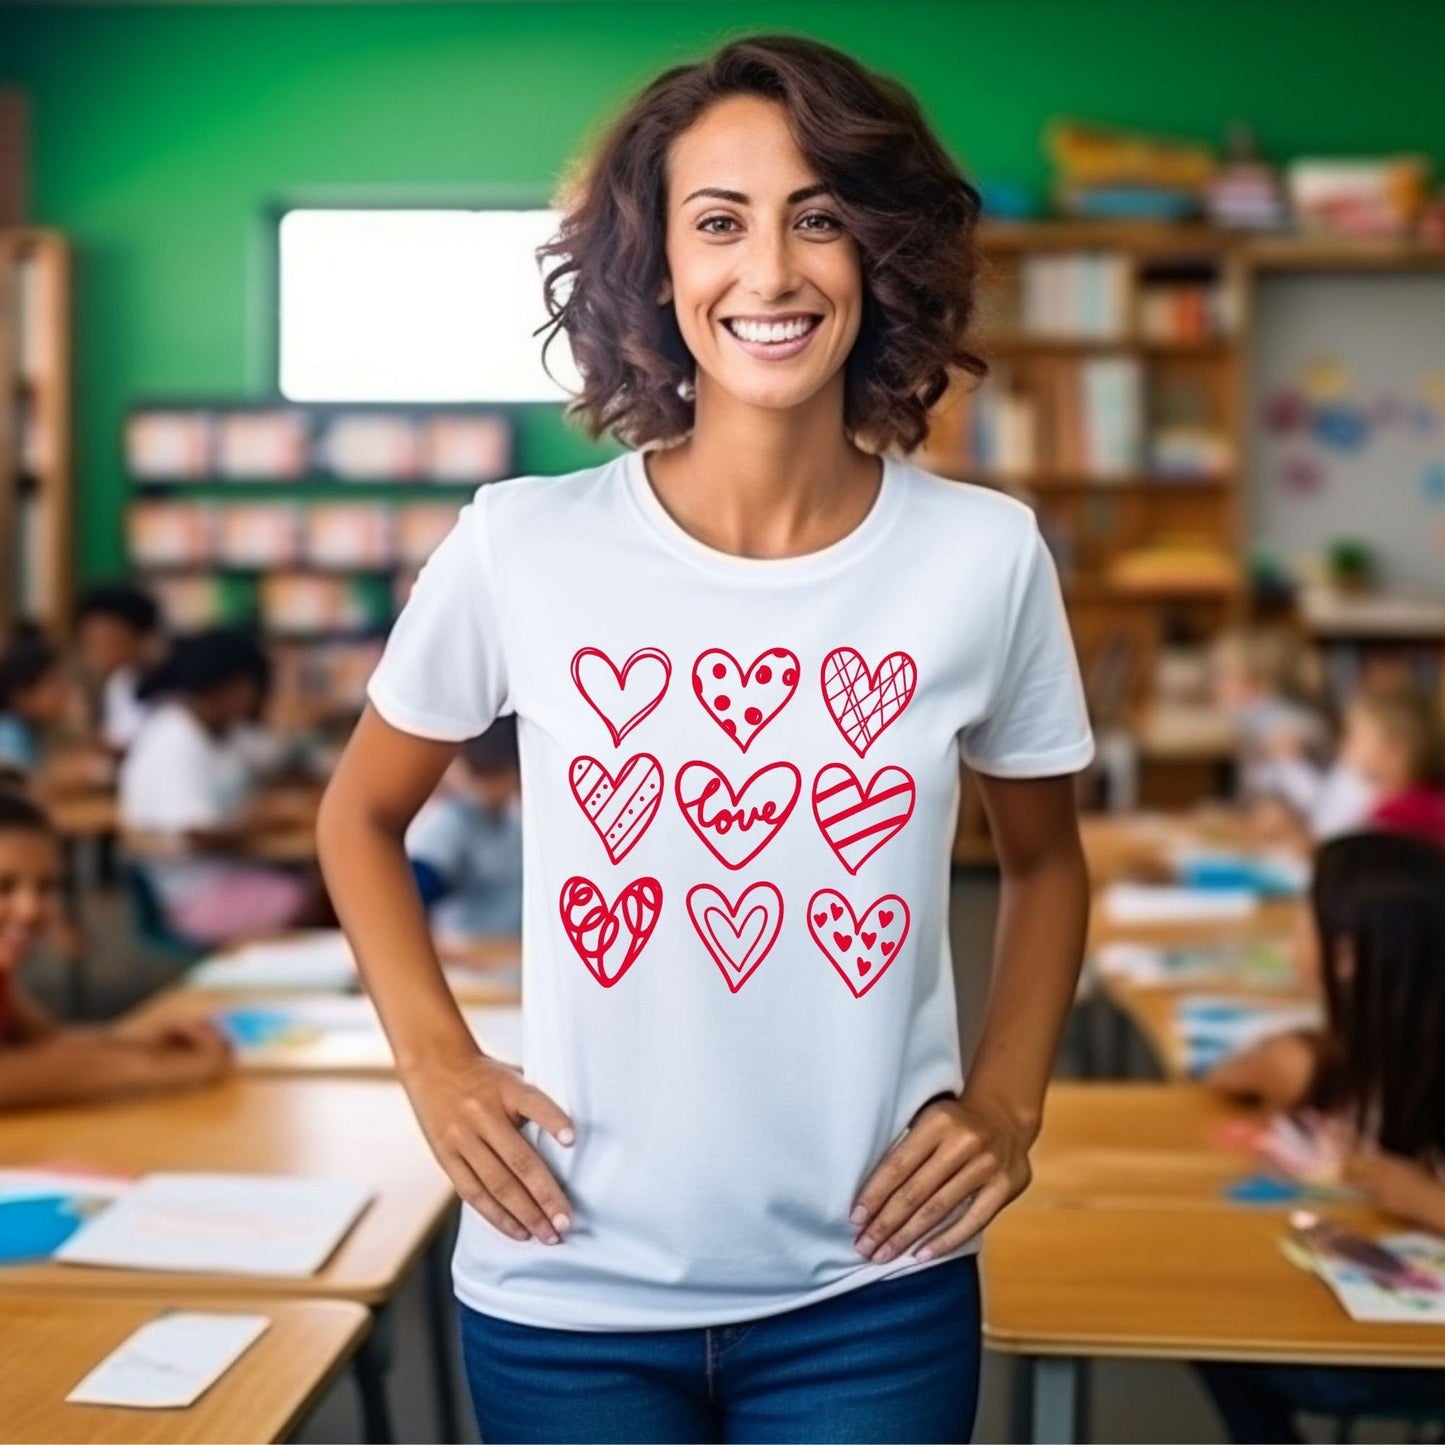 Valentines Day Nine Heart shirt, shirt for teachers, love yourself, singles day, retro vintage hearts - SBS T Shop